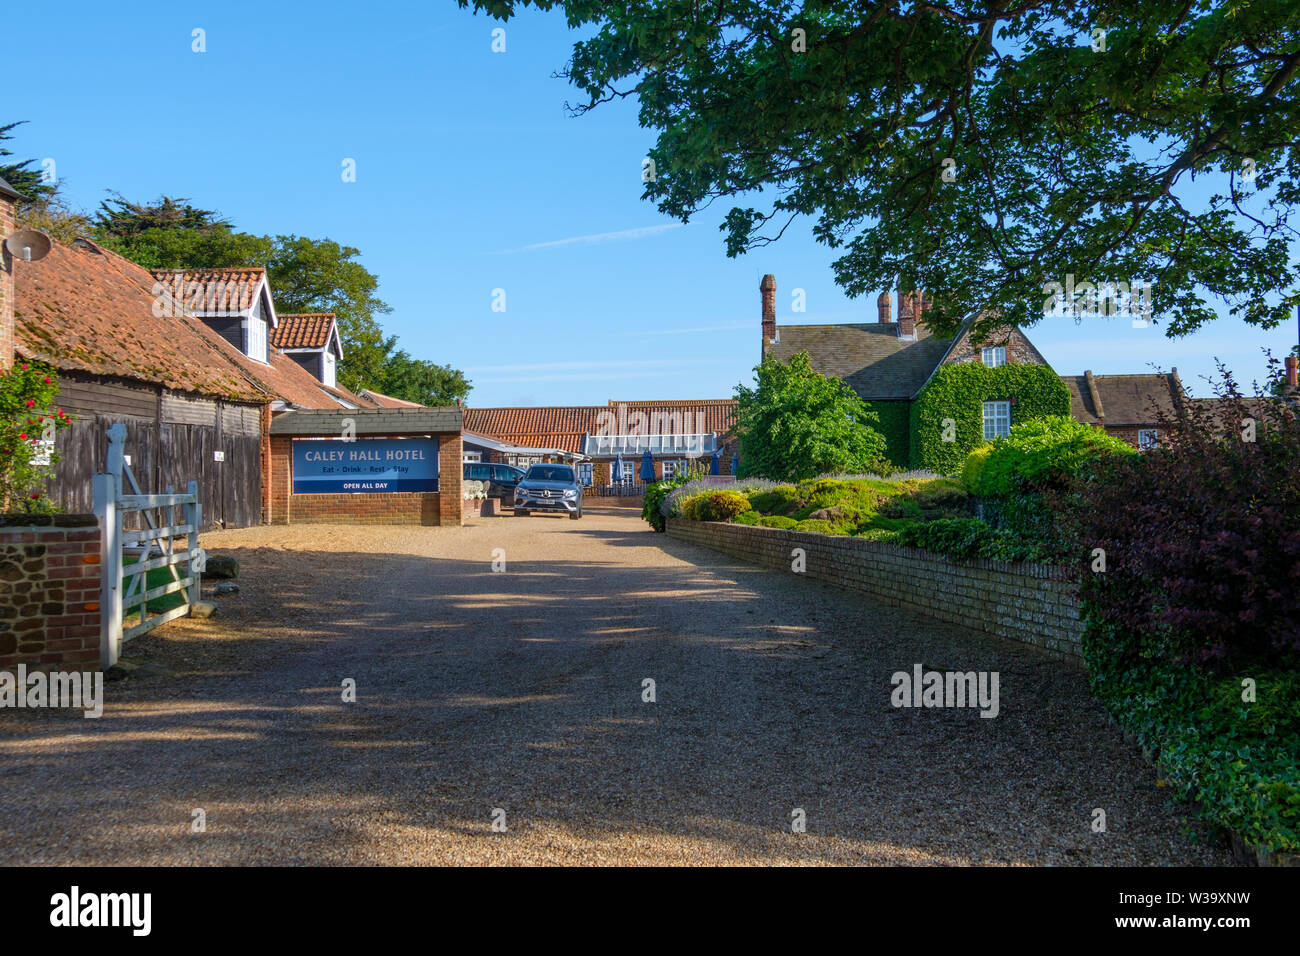 Cayley Hall Hotel in Old Hunstanton. Stock Photo